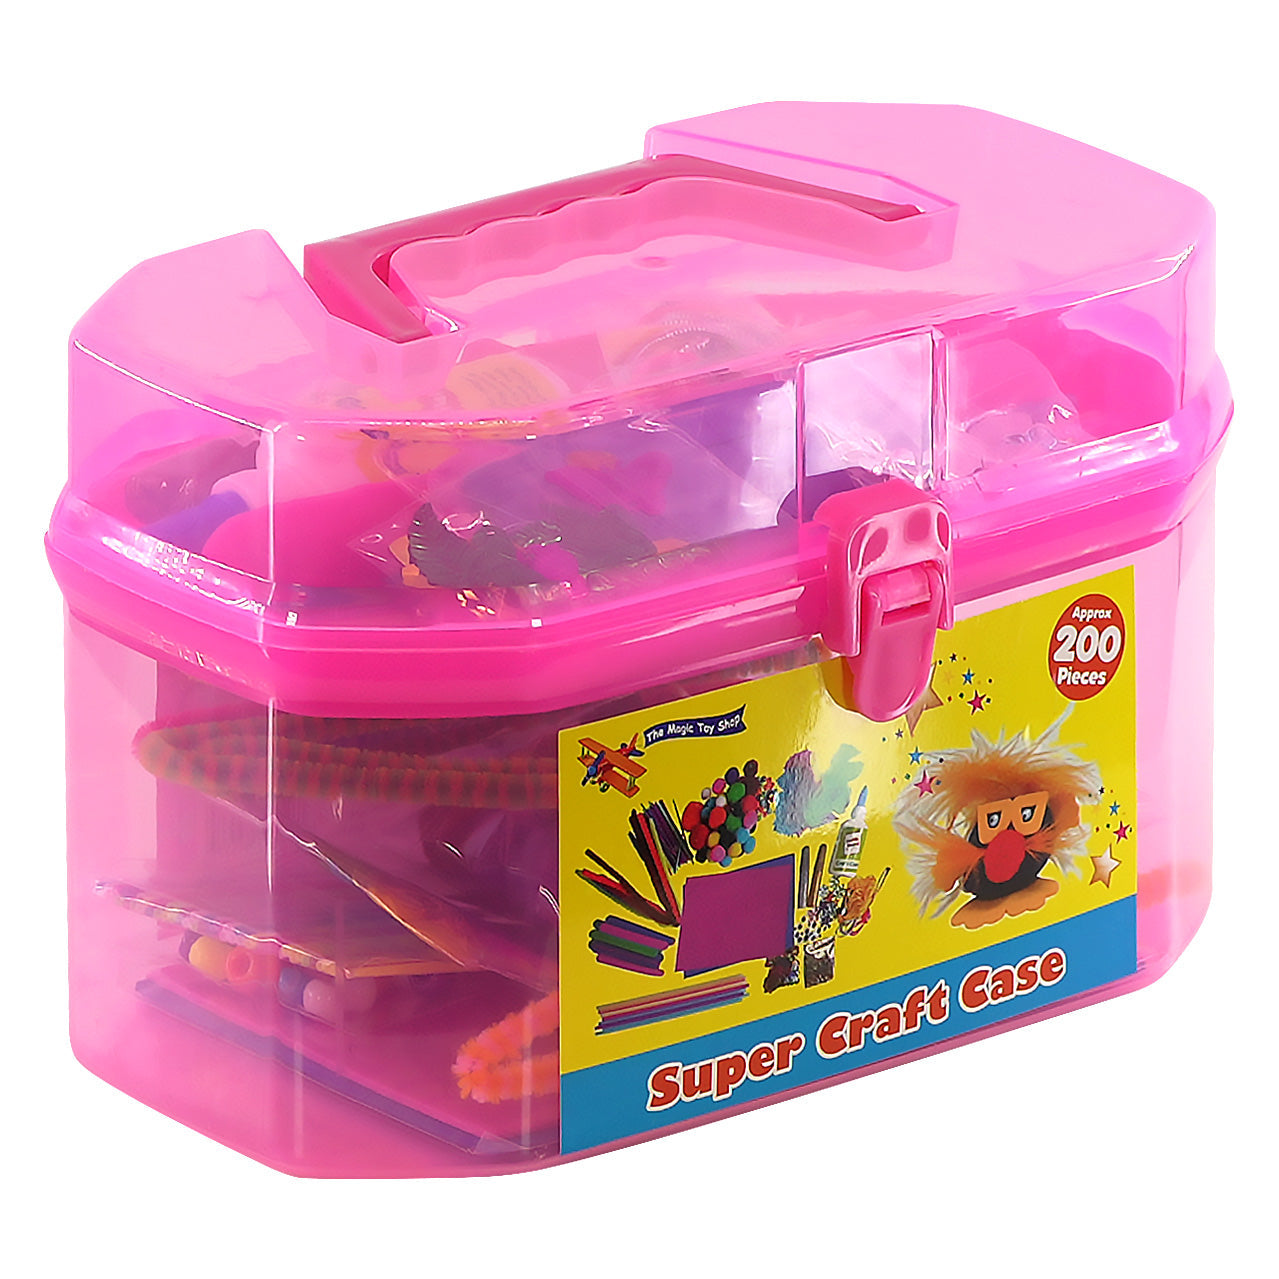 Pink Kids Super Craft Carry Case The Magic Toy Shop - The Magic Toy Shop